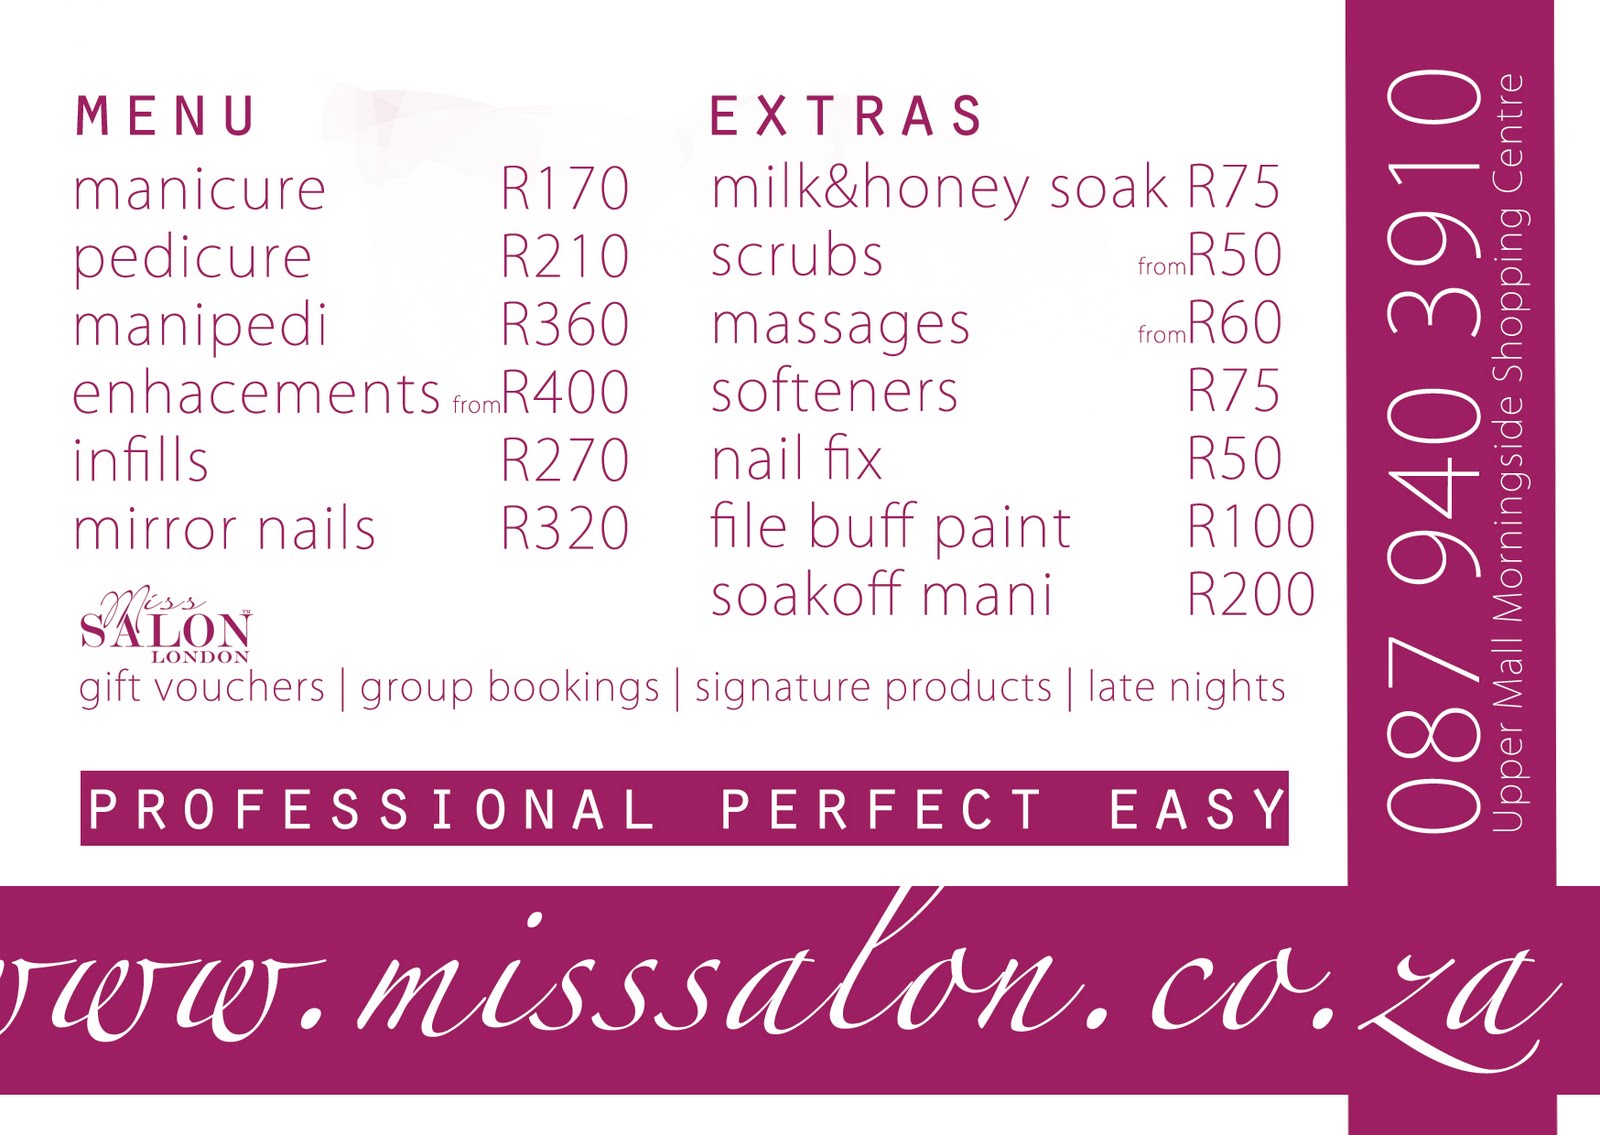 Open your own salon or nail bar with Miss Salon